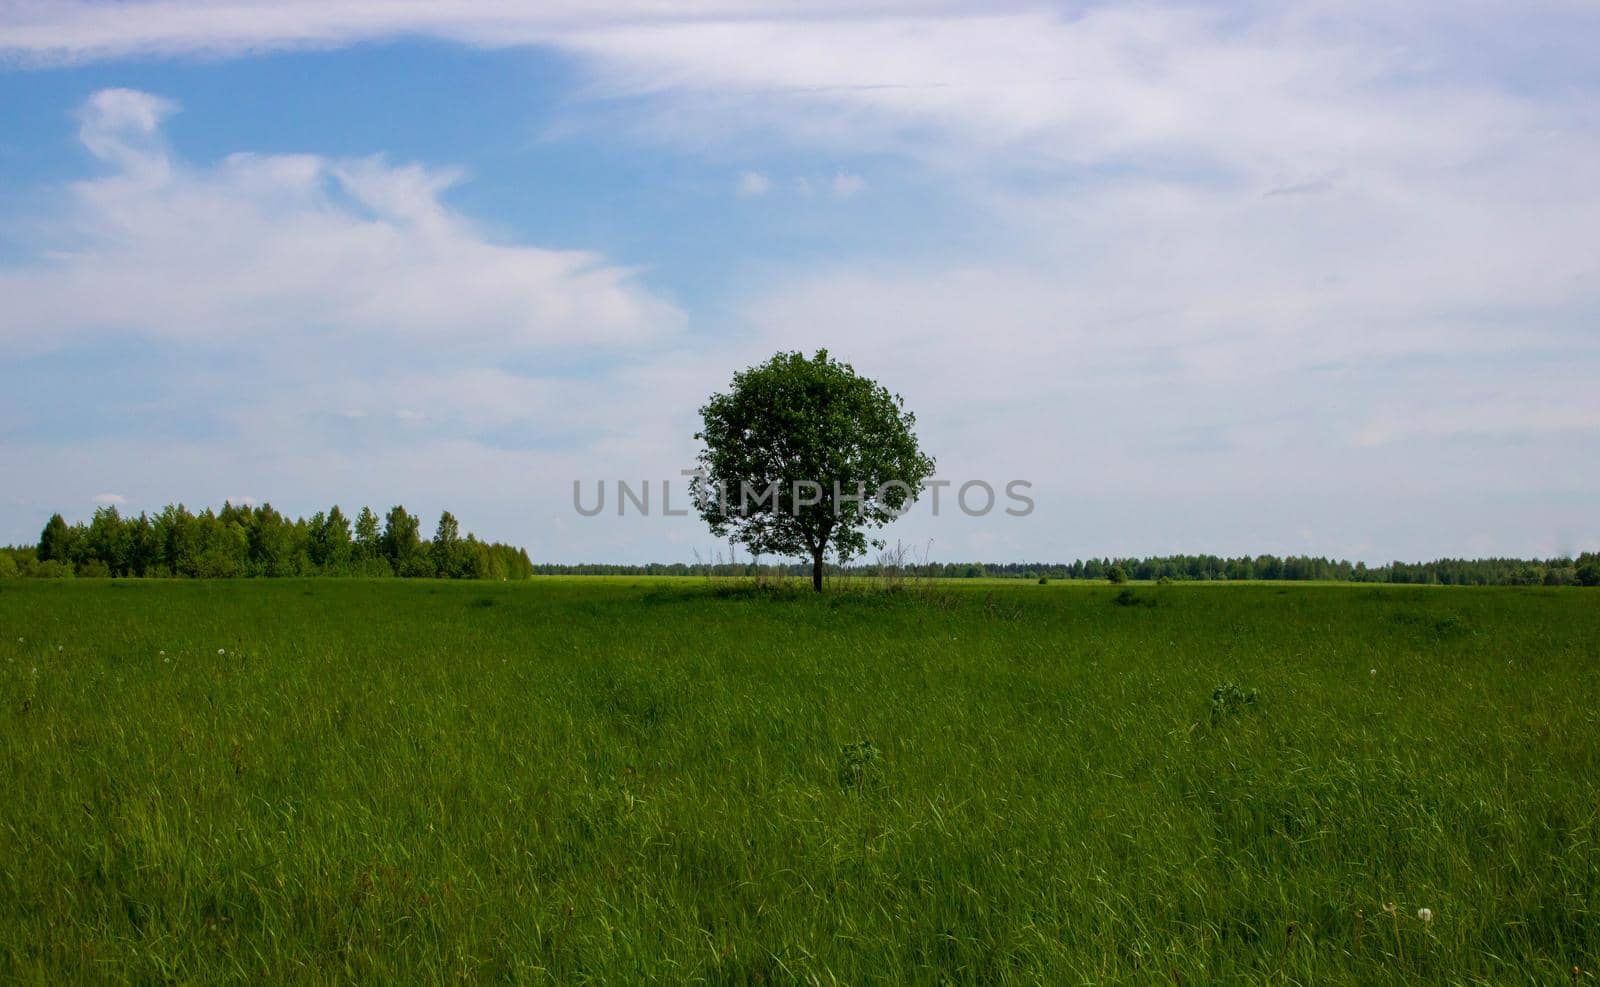 Beautiful summer landscape with a single green tree standing in a green field